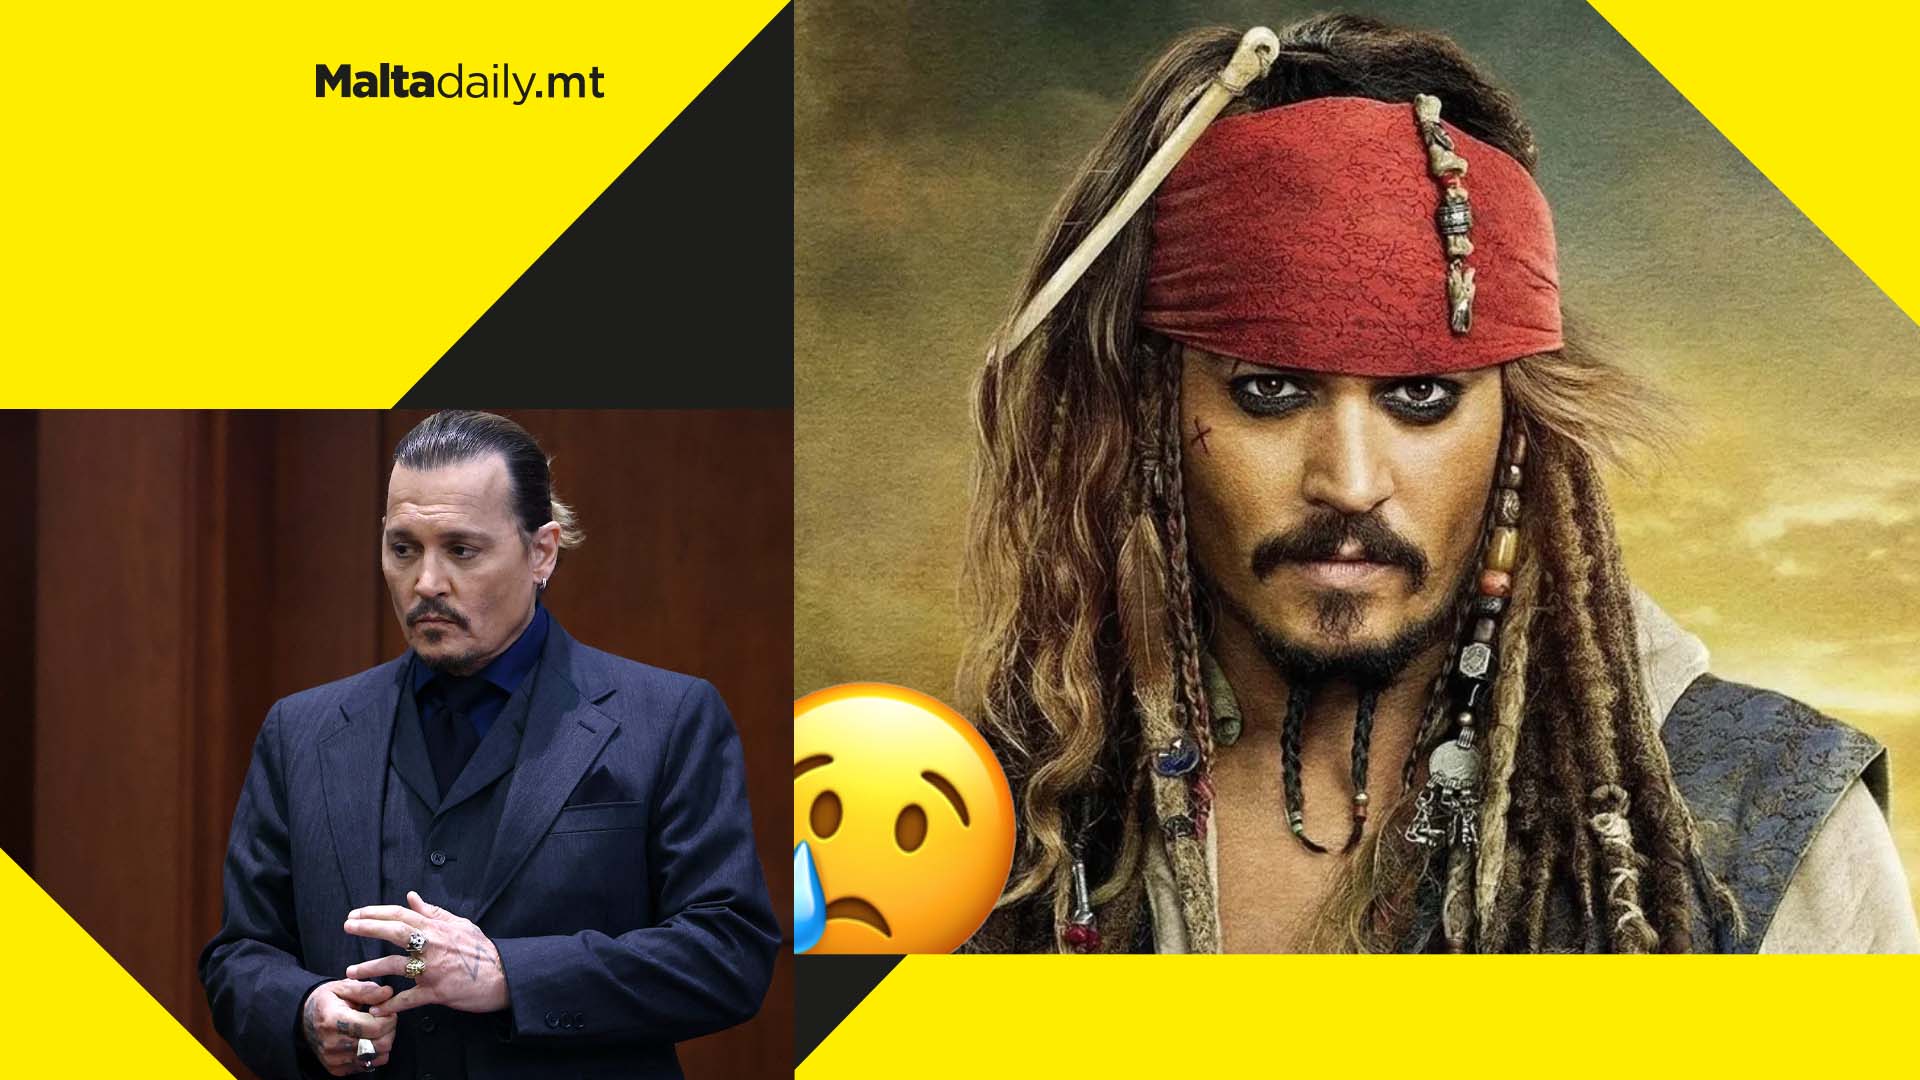 Johnny Depp will not return as Jack Sparrow in The Pirates of the Caribbean